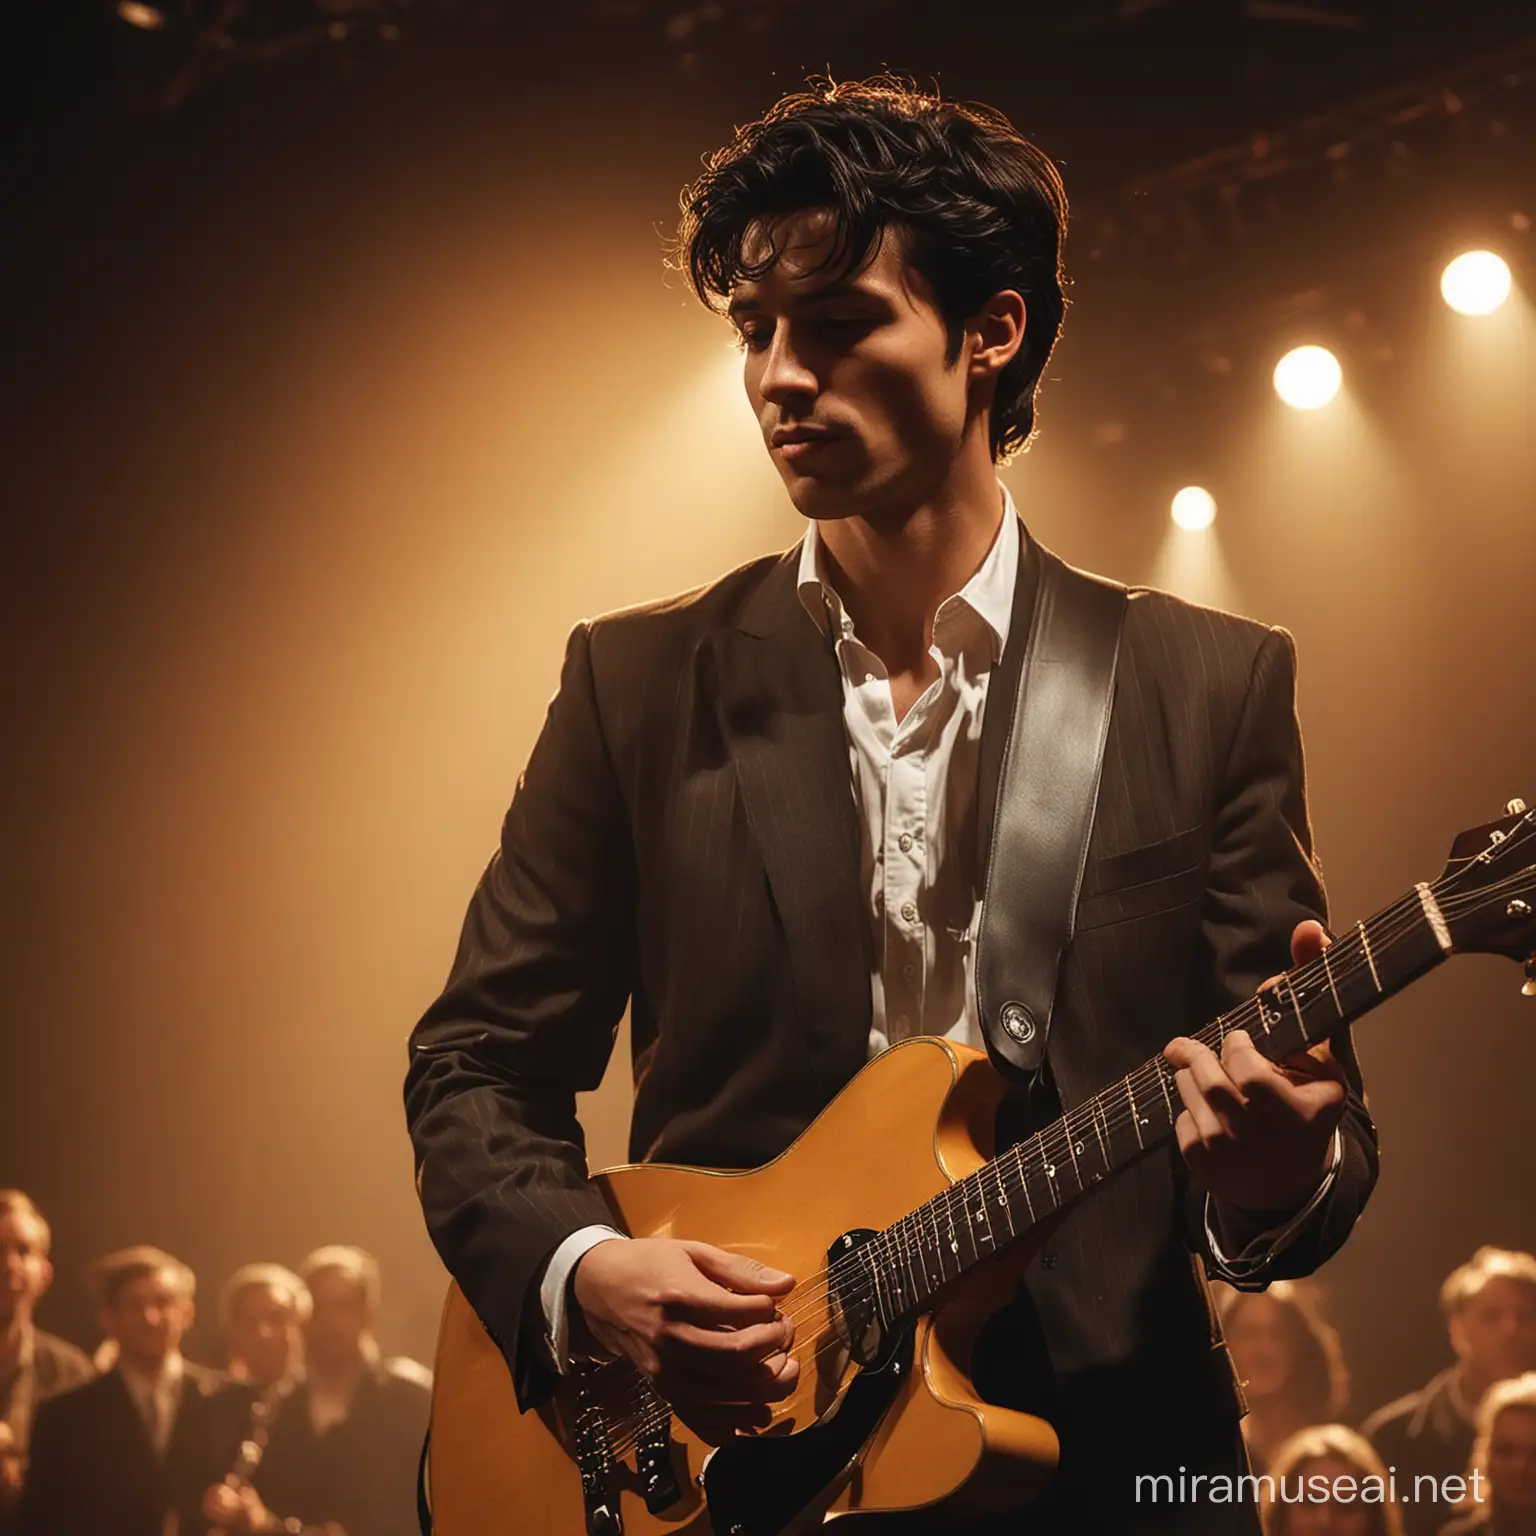 /imagine prompt: A high-quality male of European descent, performing on stage, black hair, focused expression, holding a classic guitar, in the spotlight with a blurred cheering crowd in the background. Dramatic stage lighting with warm amber tones highlighting the artist, moody and evocative --ar 16:9 --v 6.0
